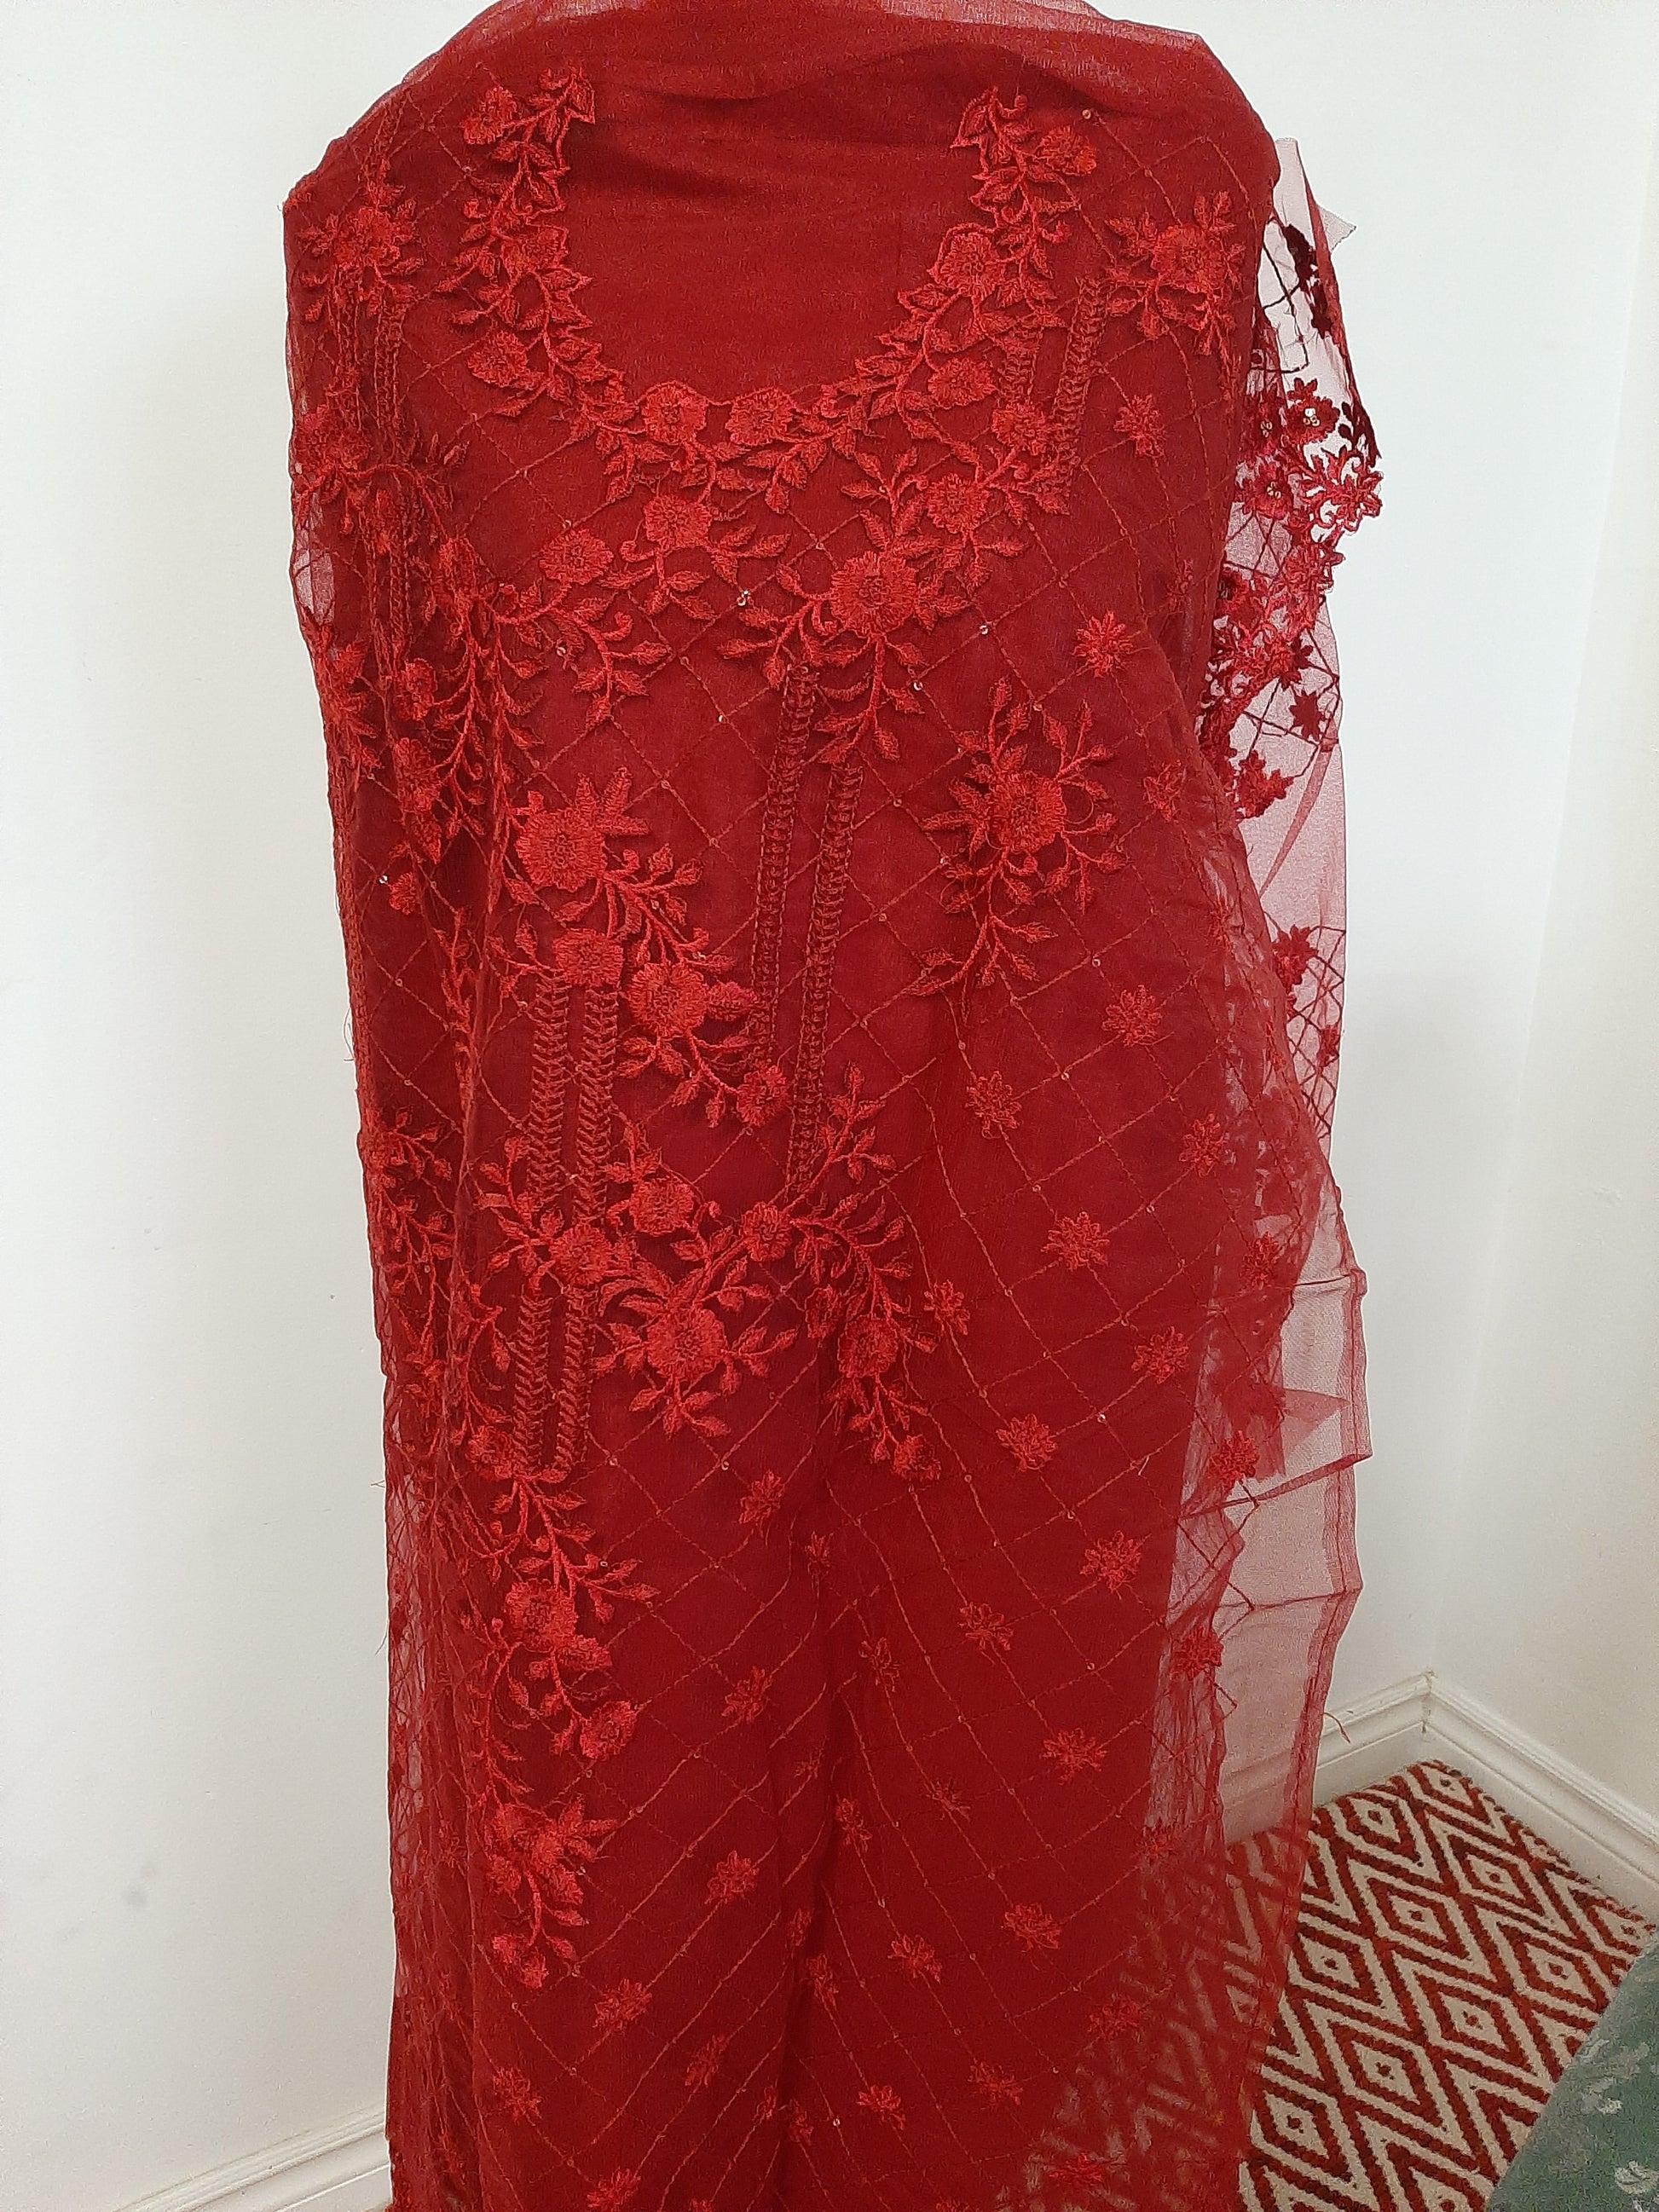 Lovely Unstitched Dark Red Material @ DressingStylesCA.com